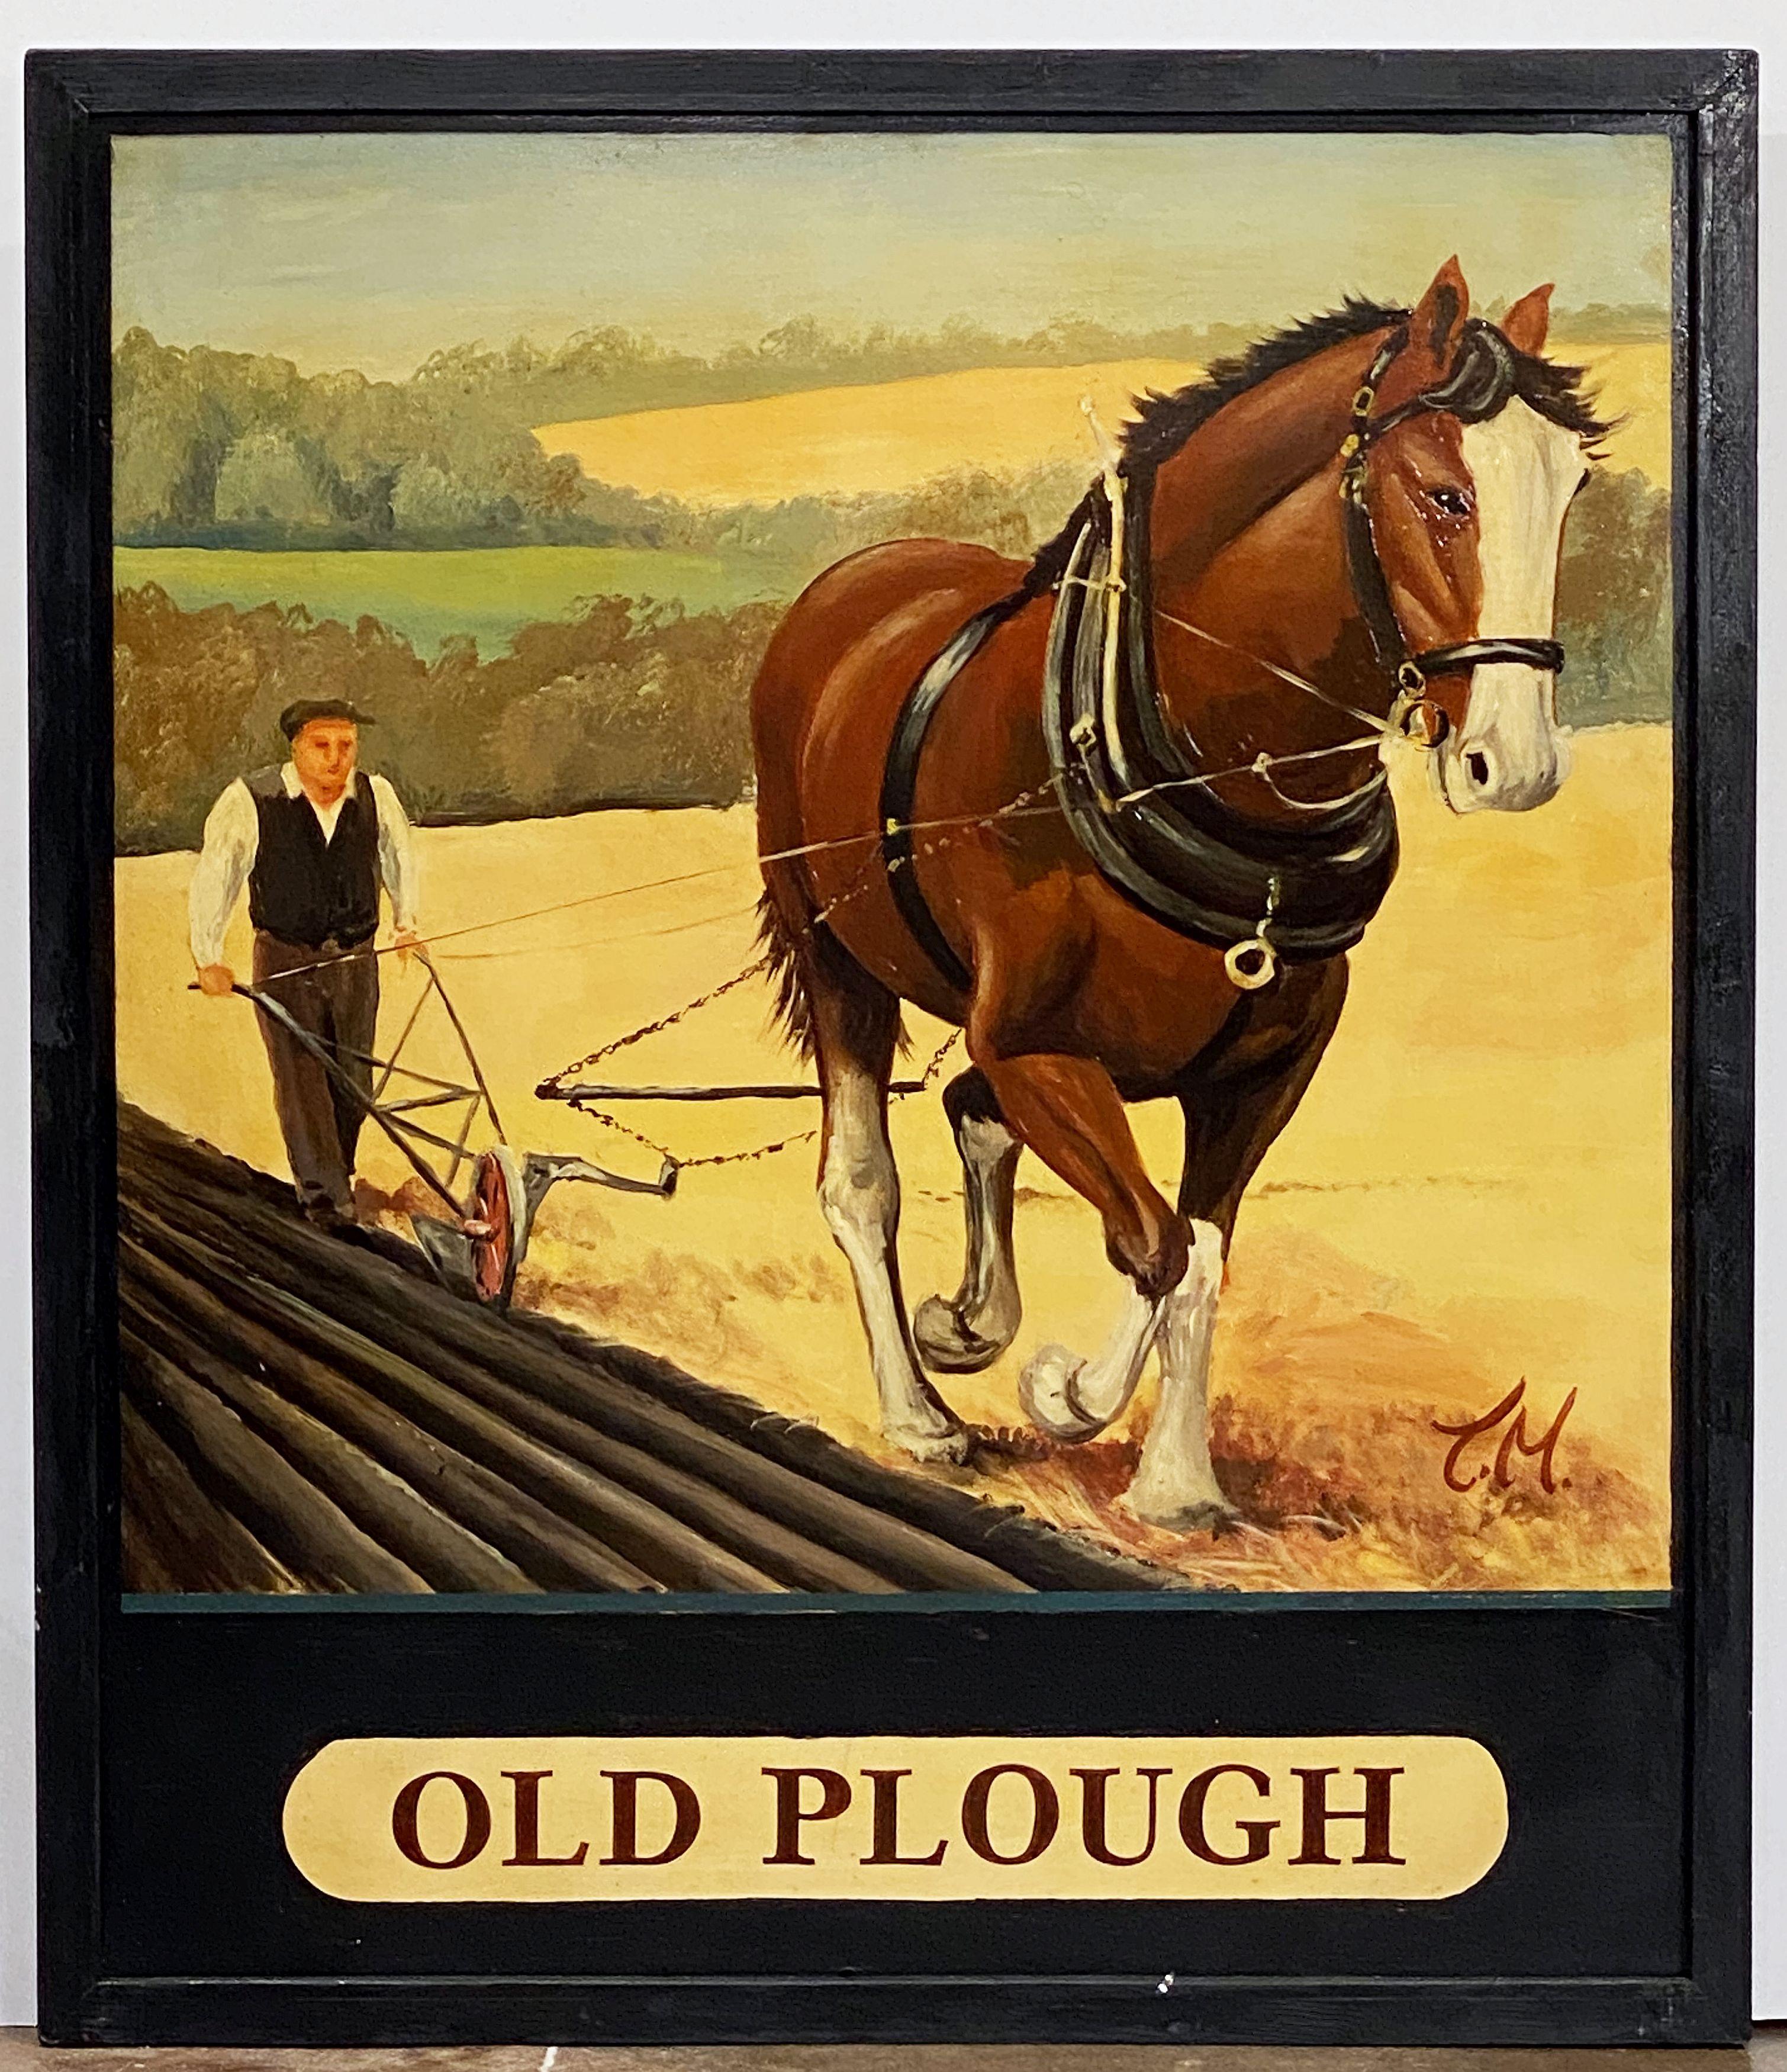 An authentic English pub sign (one-sided) featuring a painting of a man and horse plowing a field, entitled: Old Plough

A very fine example of vintage advertising artwork and ready for display.